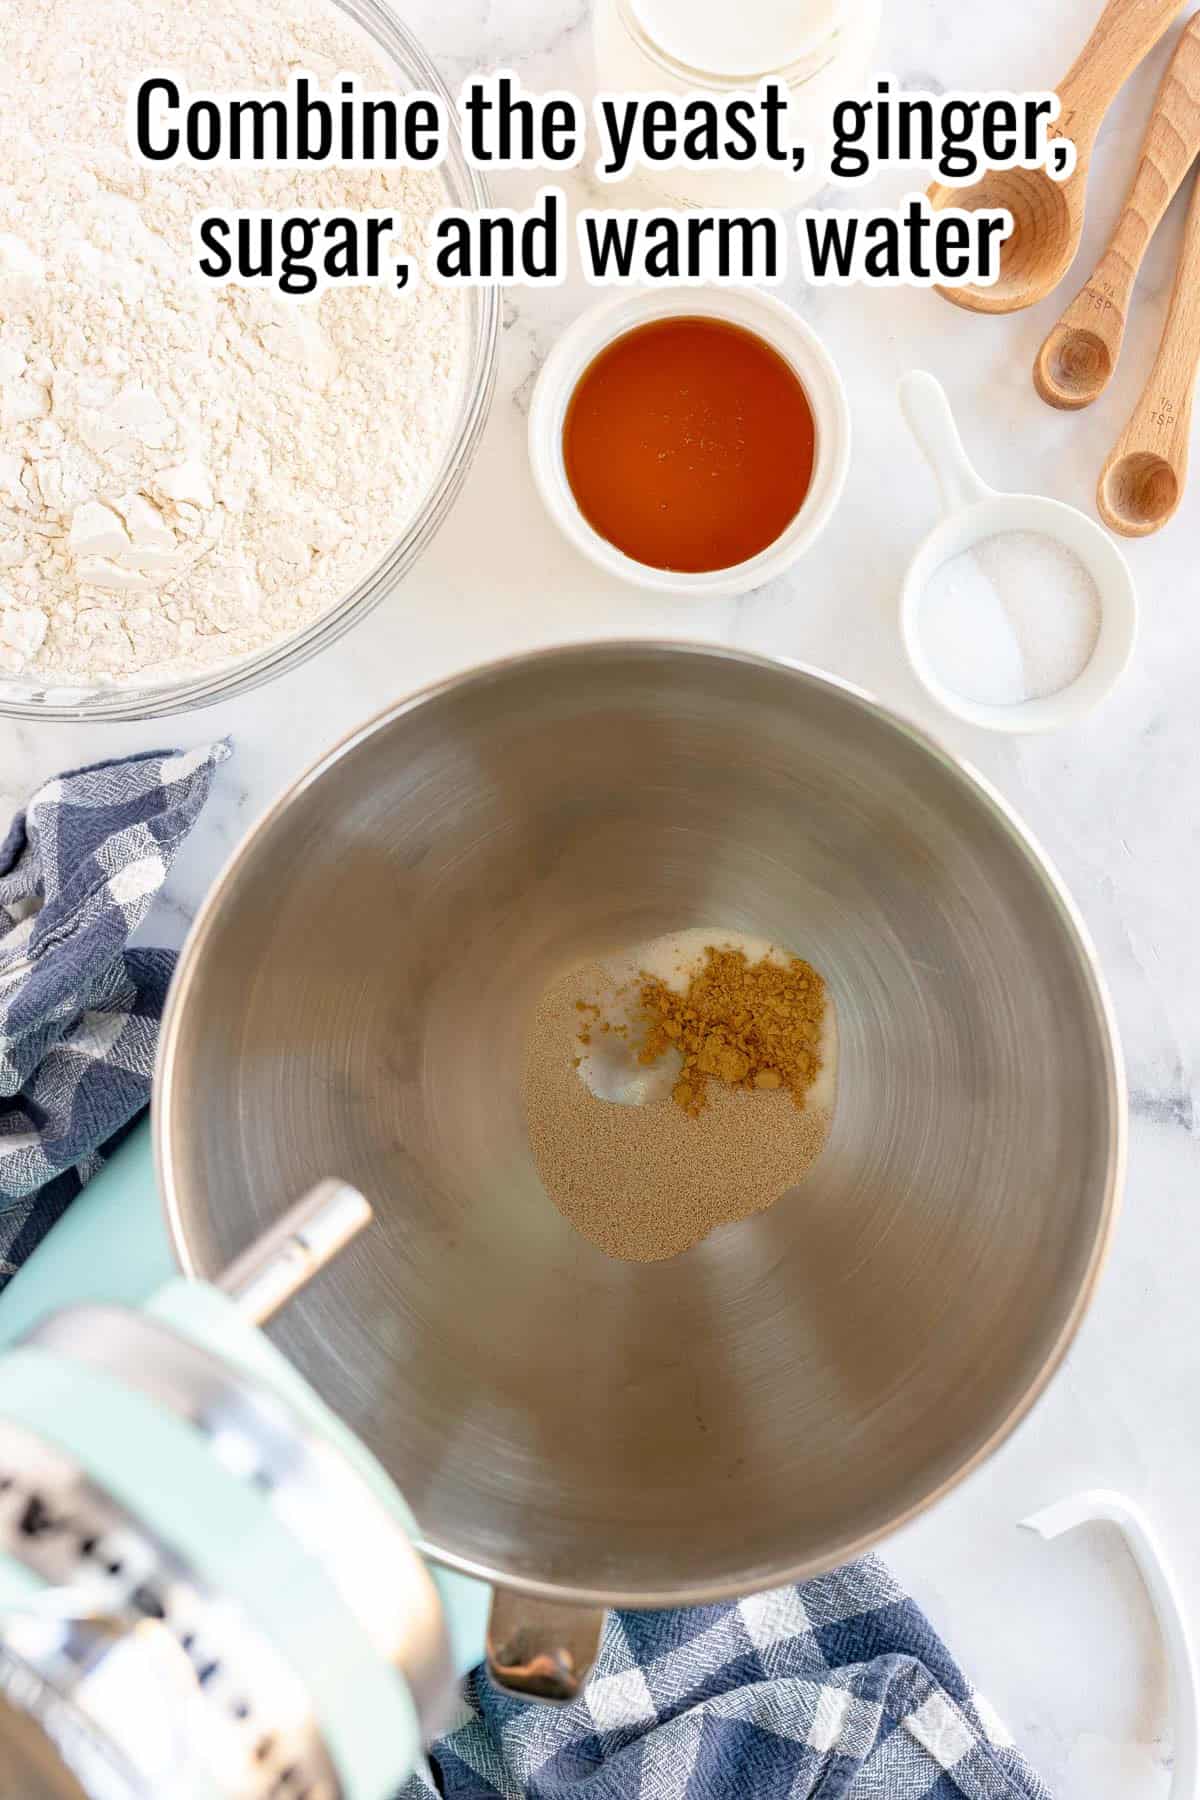 A large mixing bowl contains yeast and ginger, essential for sandwich bread. Next to it are bowls with flour, sugar, water, and measuring spoons. An instruction reading "Combine the yeast, ginger, sugar, and warm water" is at the top.